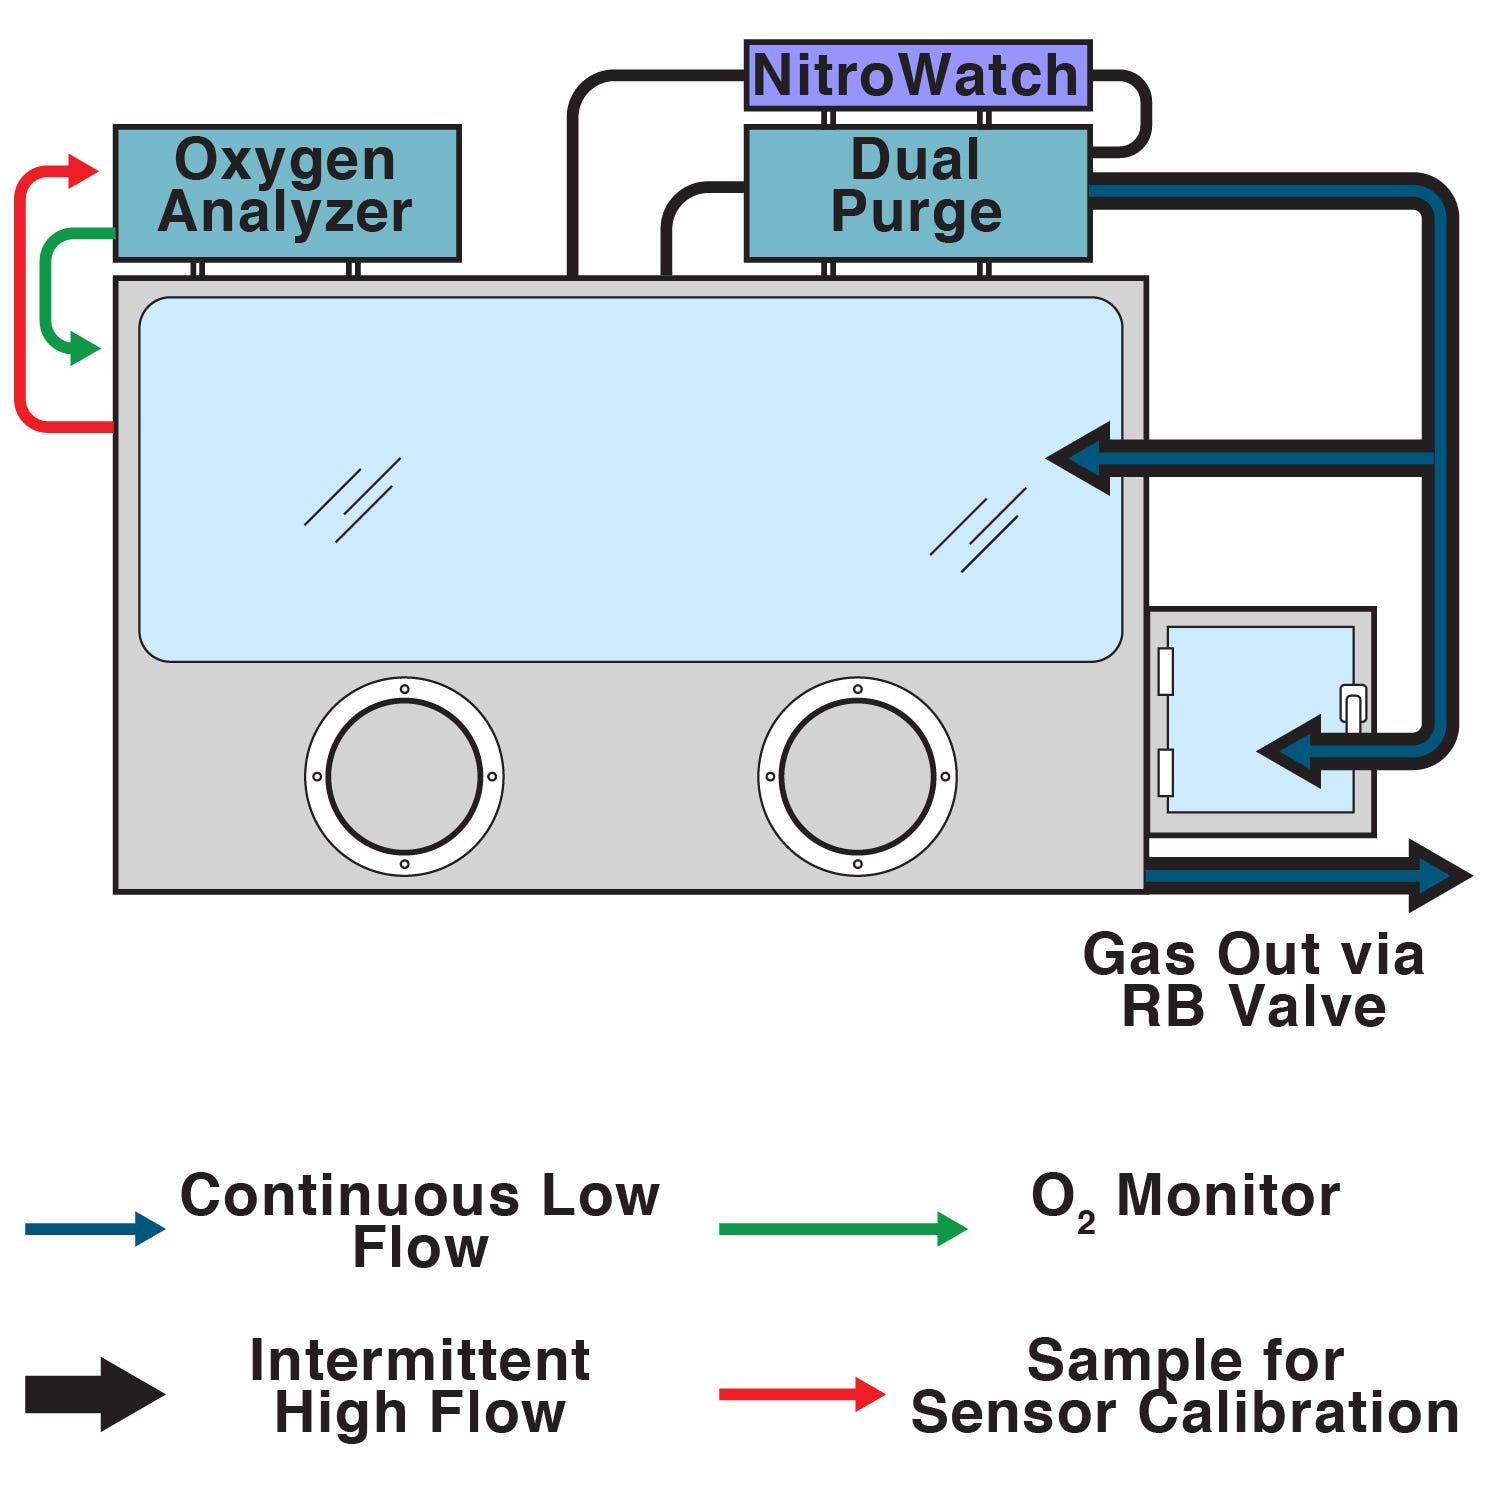 Airflow illustration for NitroWatch, Dual Purge, and oxygen analyzer systems in glovebox